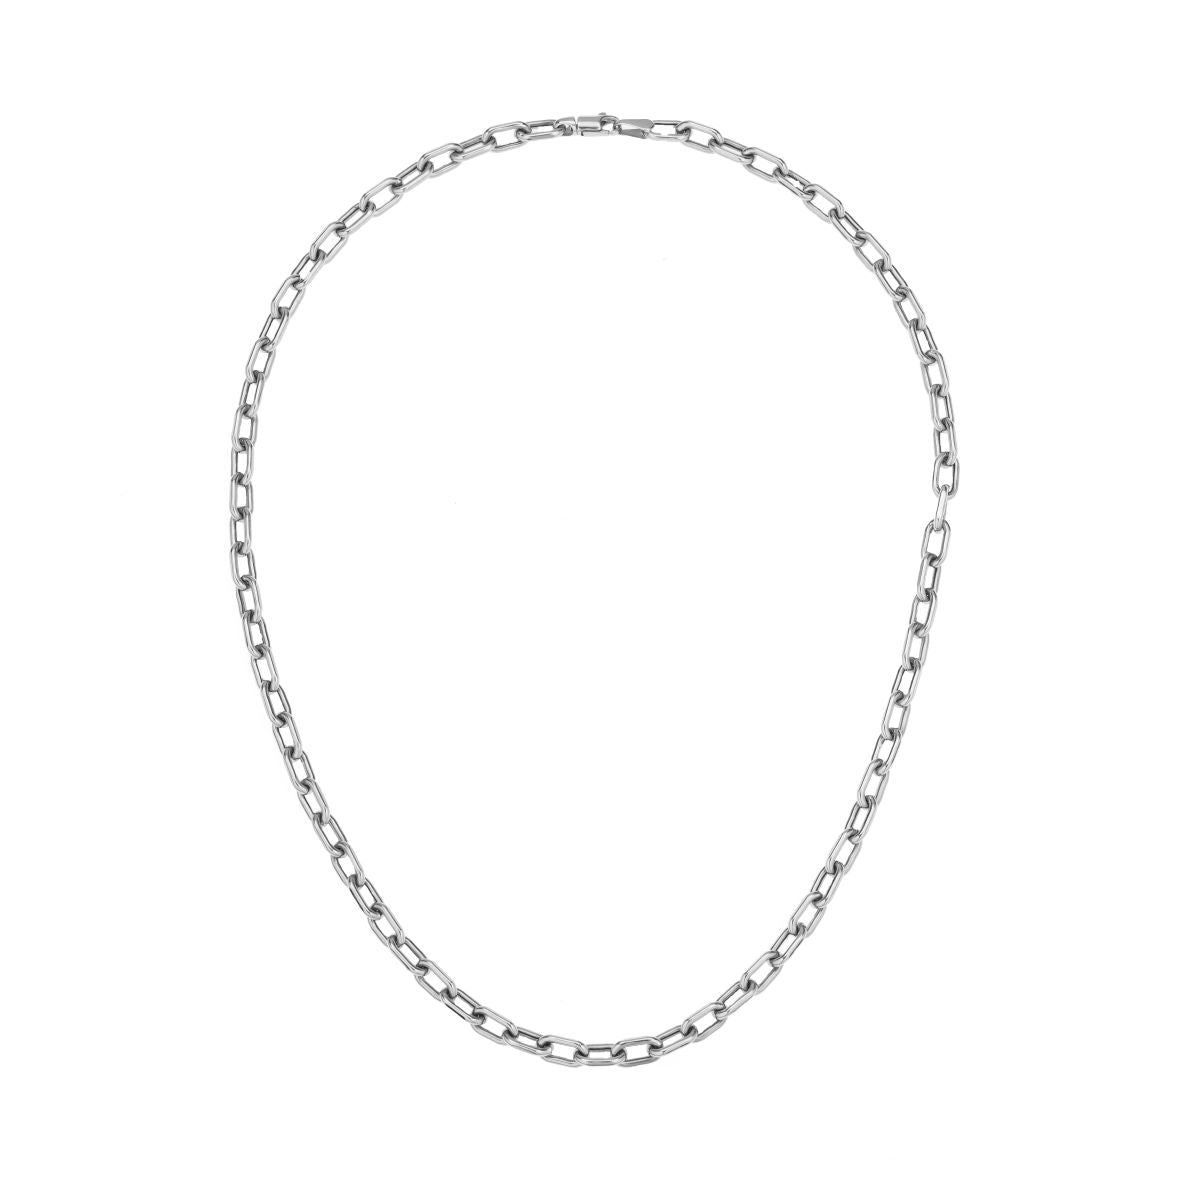 4mm Italian Chain Link Necklace in Sterling Silver